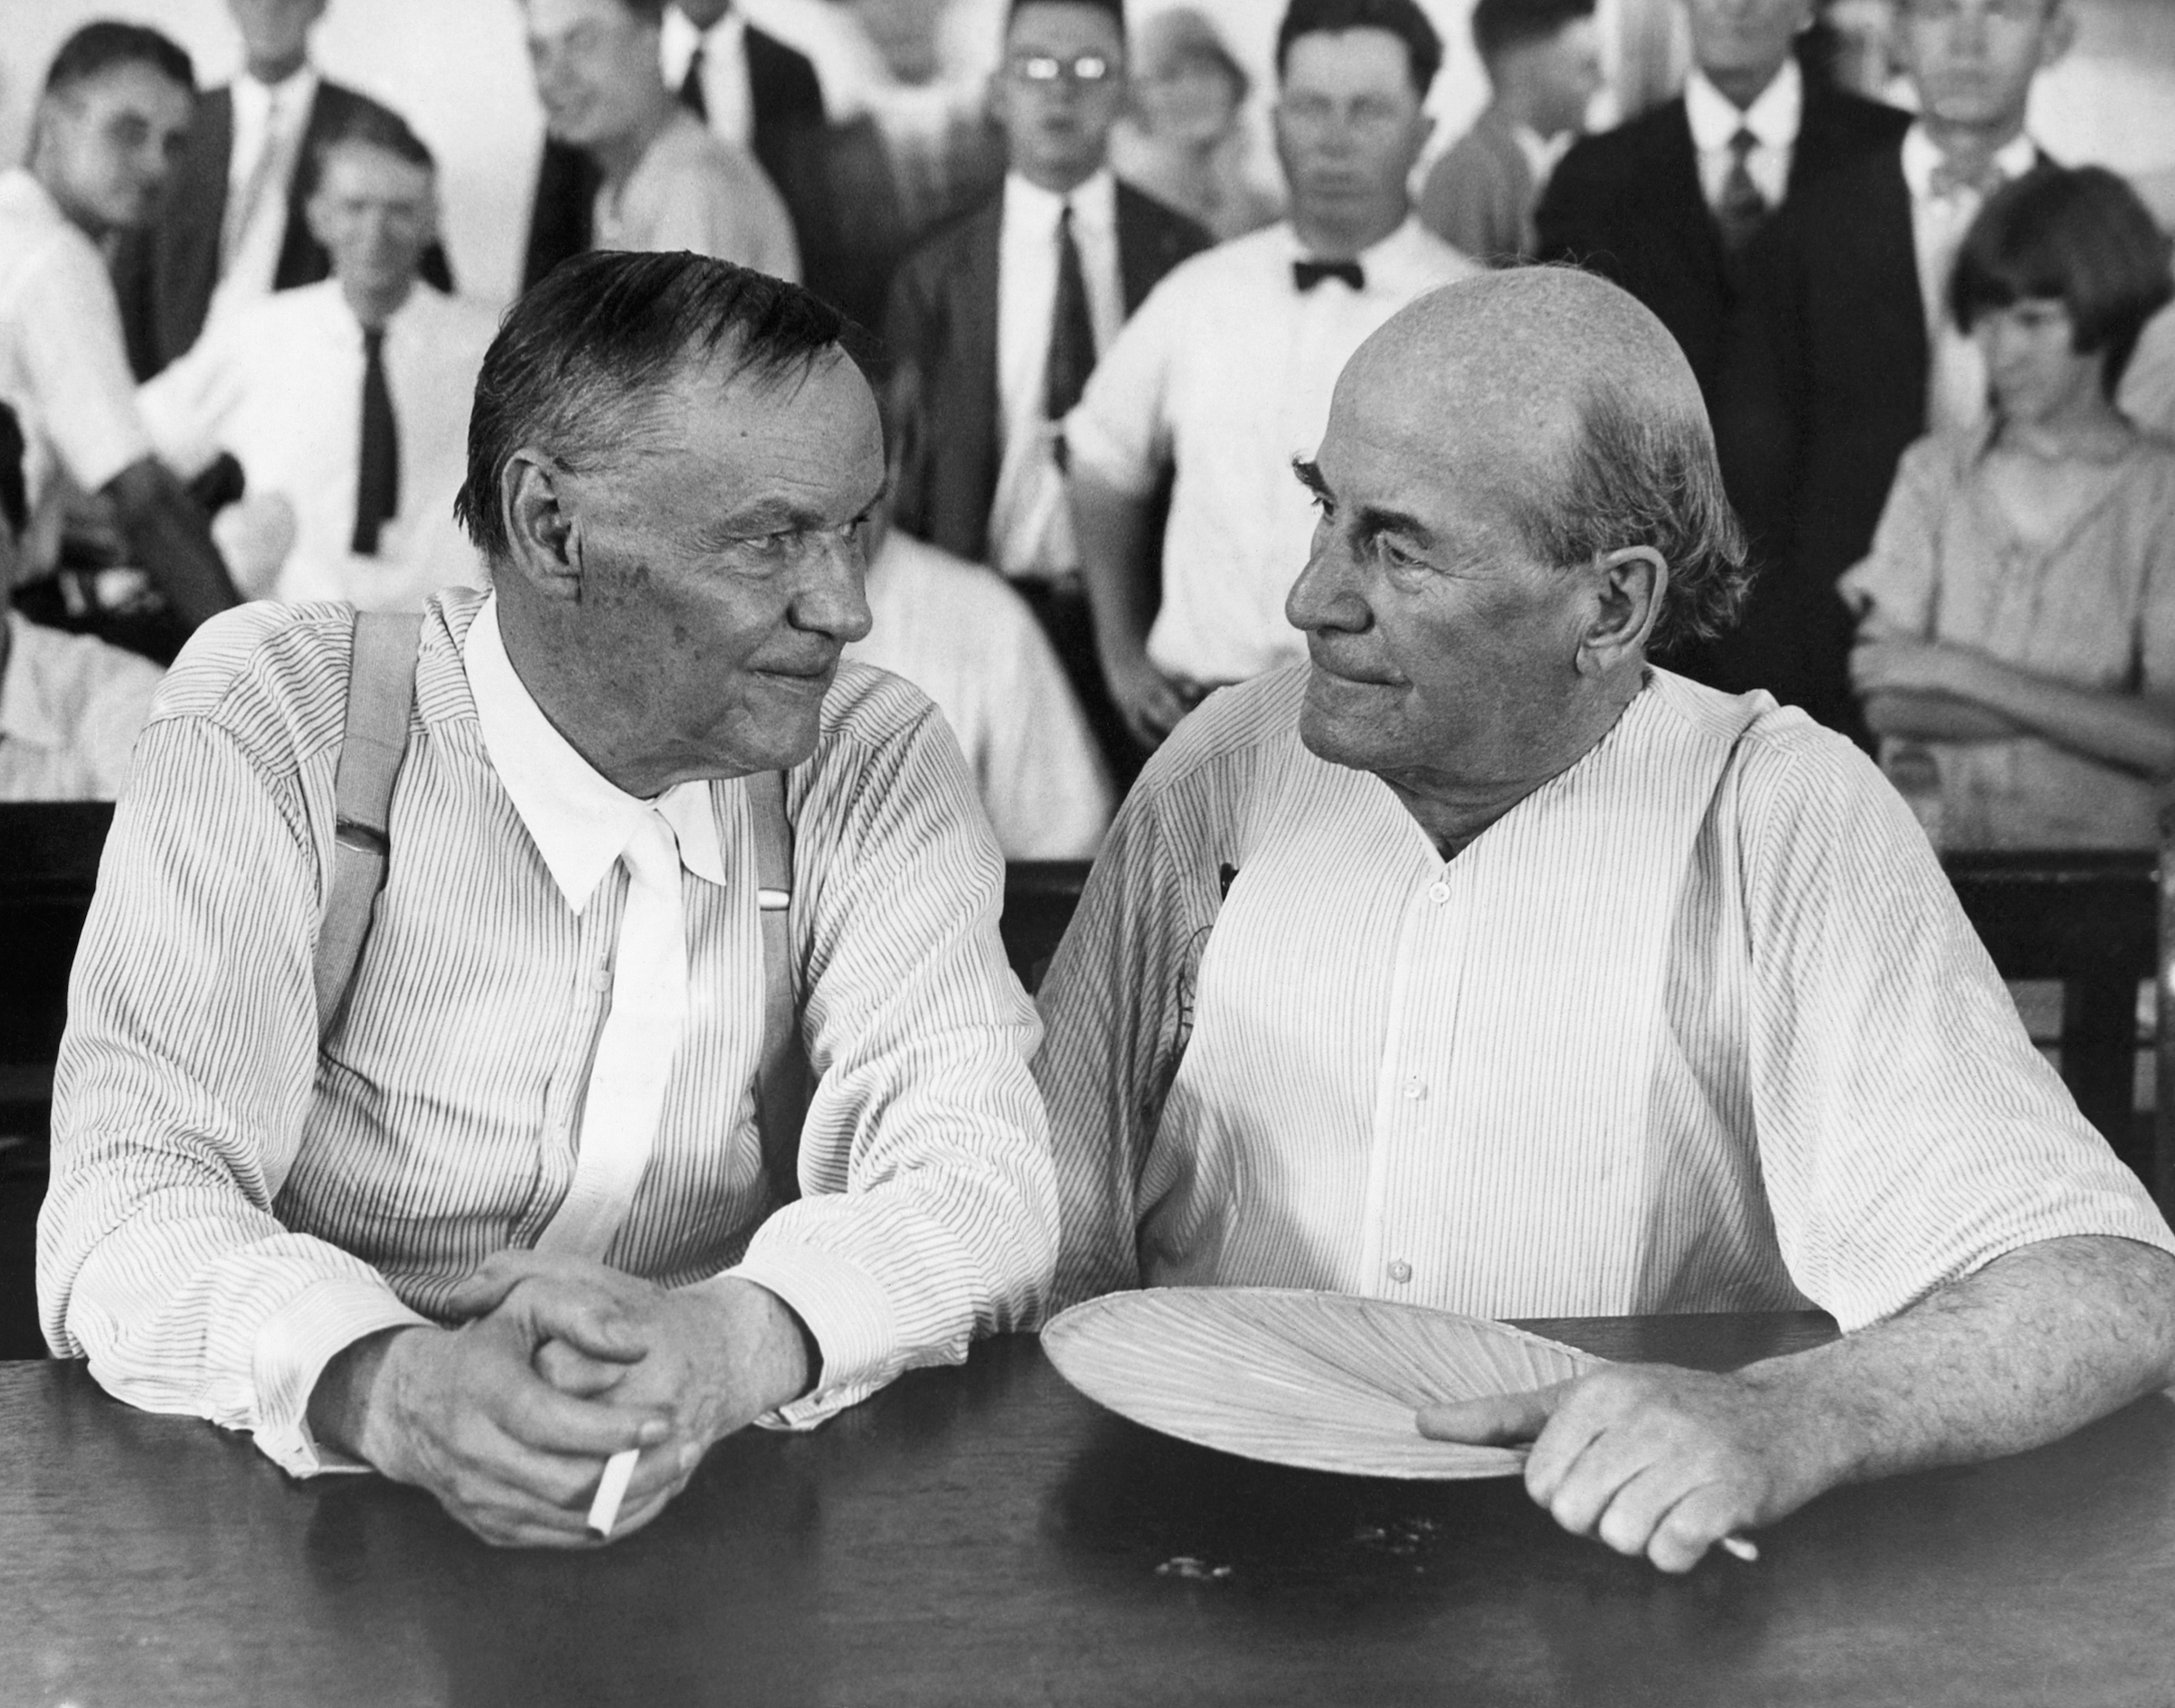 Clarence Darrow, a famous Chicago lawyer, and William Jennings Bryan, defender of Fundamentalism, have a chat in a courtroom during the Scopes evolution trial in 1925. (Bettmann/Getty Images)